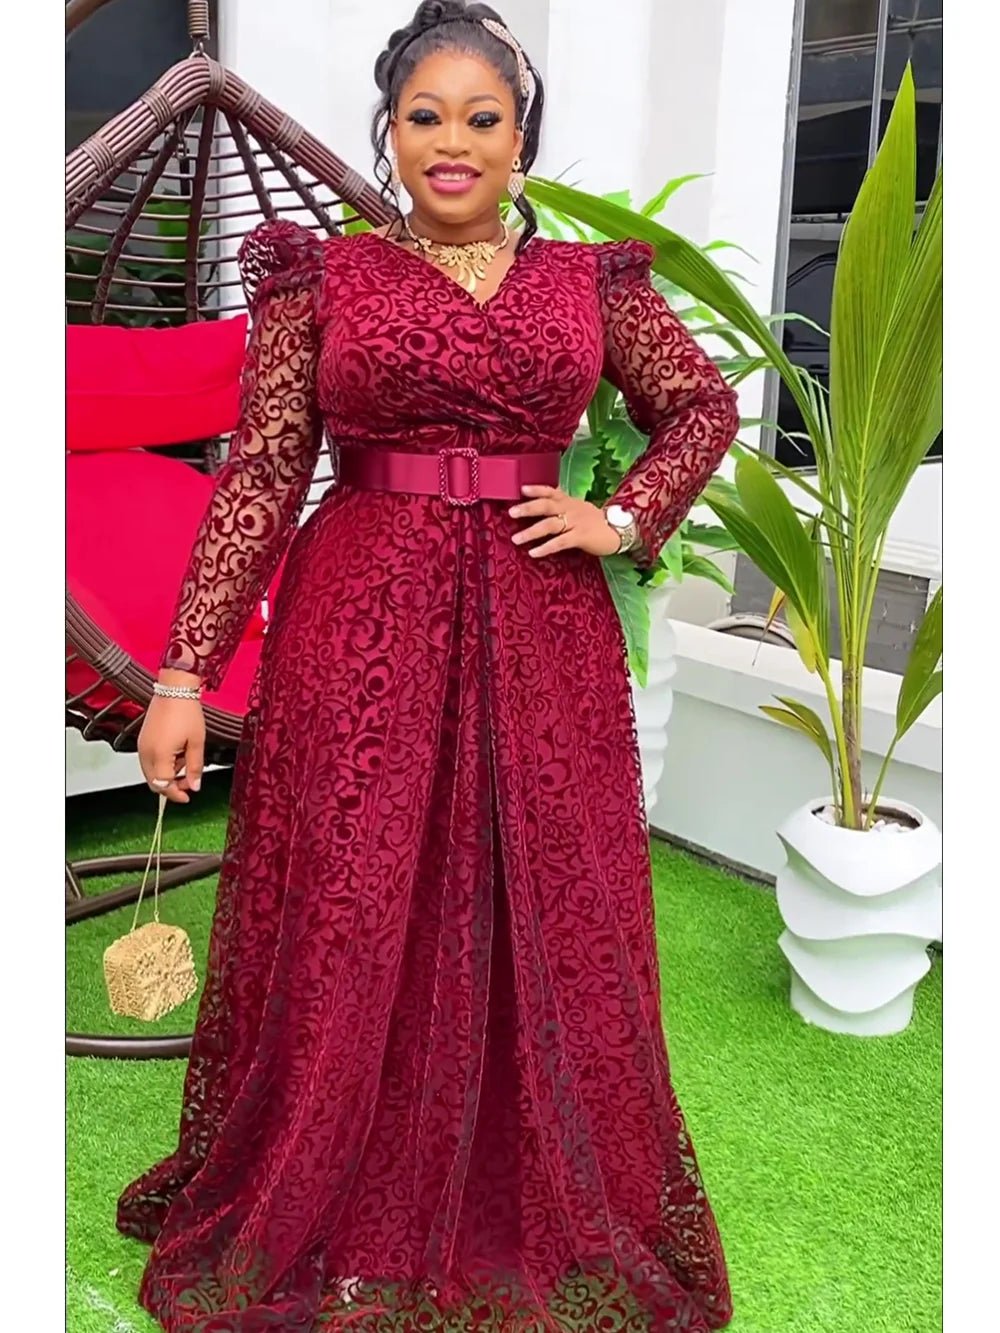 Elegant Maxi Dashiki Lace Wedding Gowns: Plus Size African Party Dresses for Women's Fashion - Flexi Africa - FREE POST